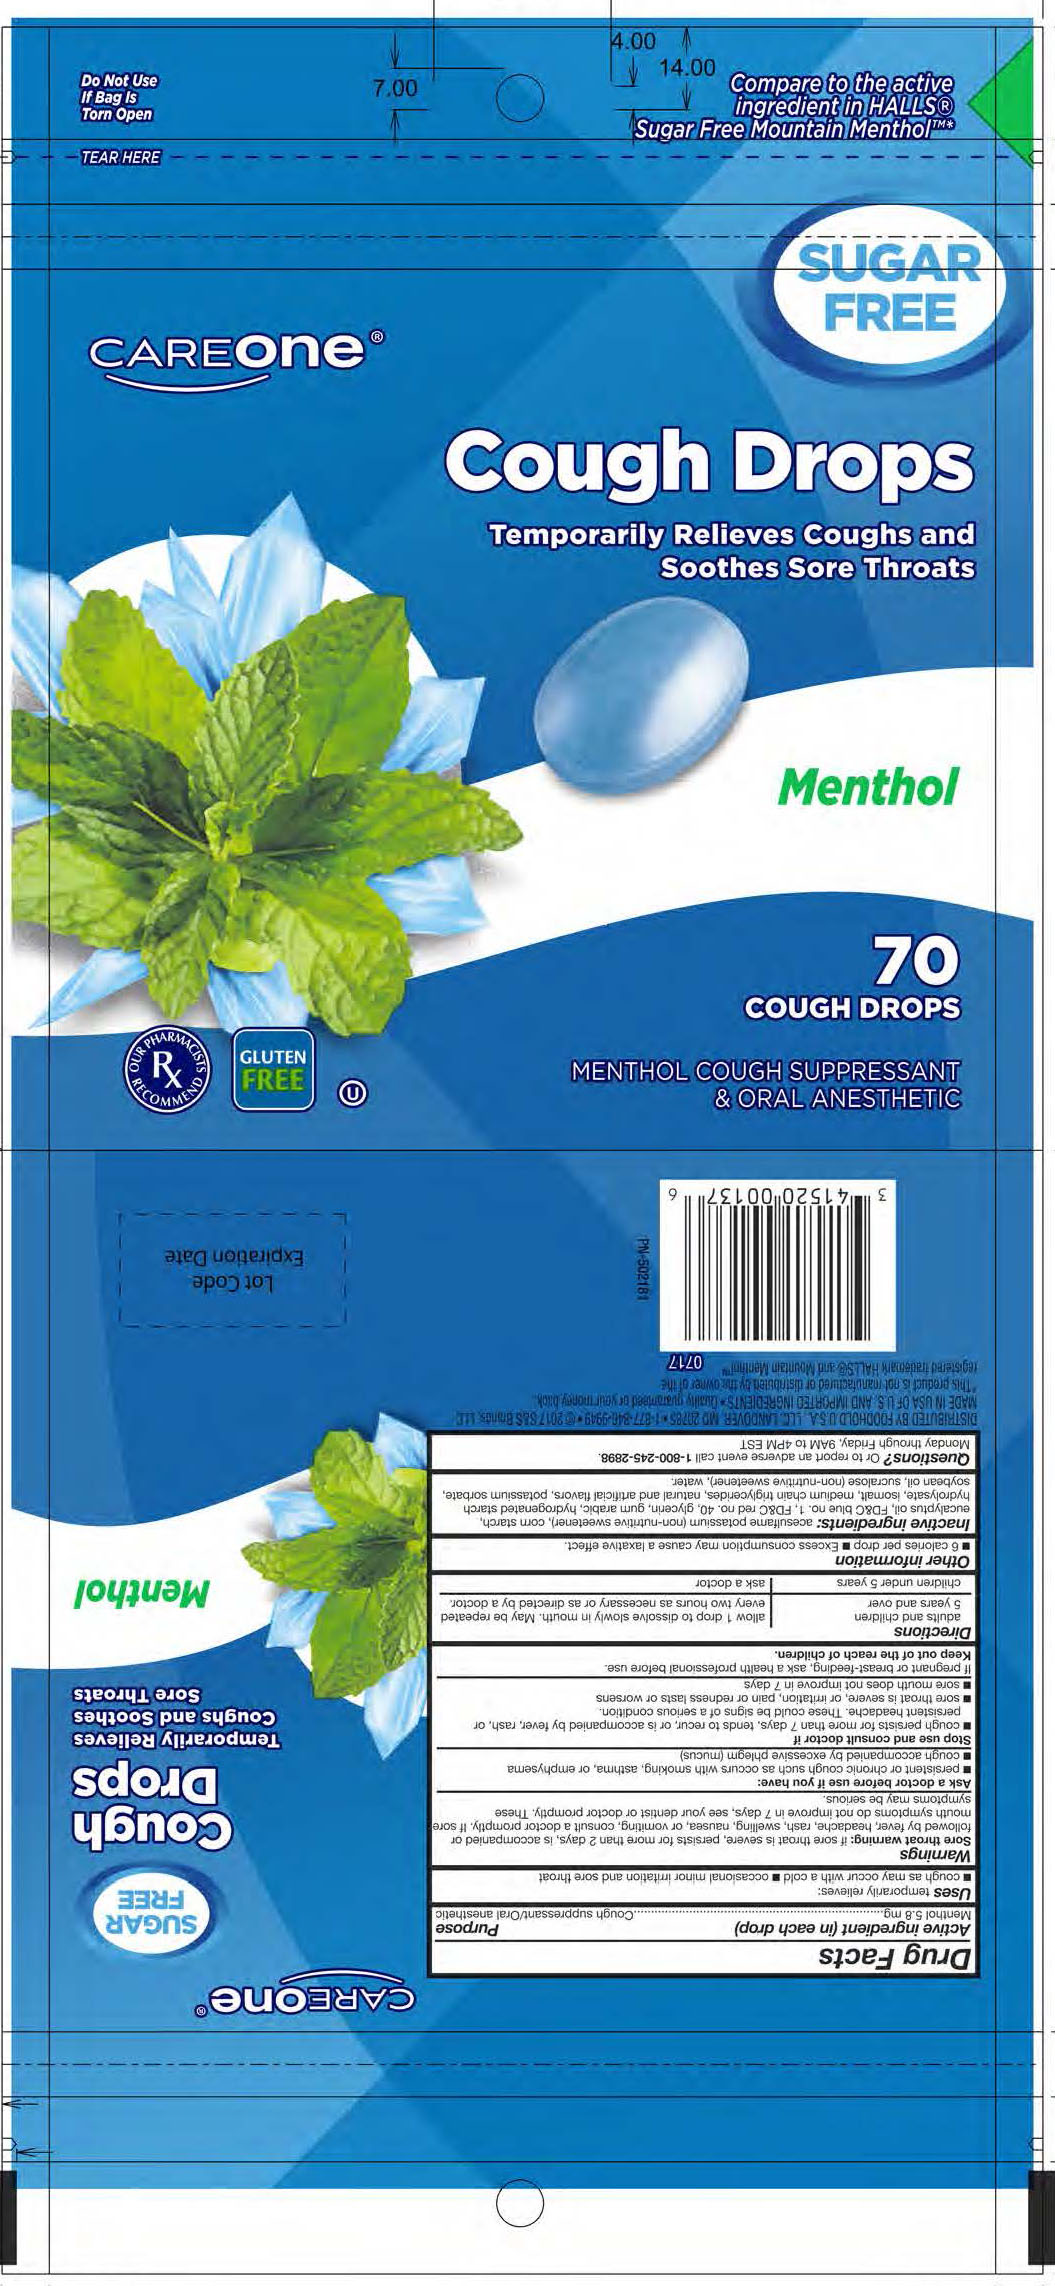 CareOne SF Menthol 70ct Cough Drops